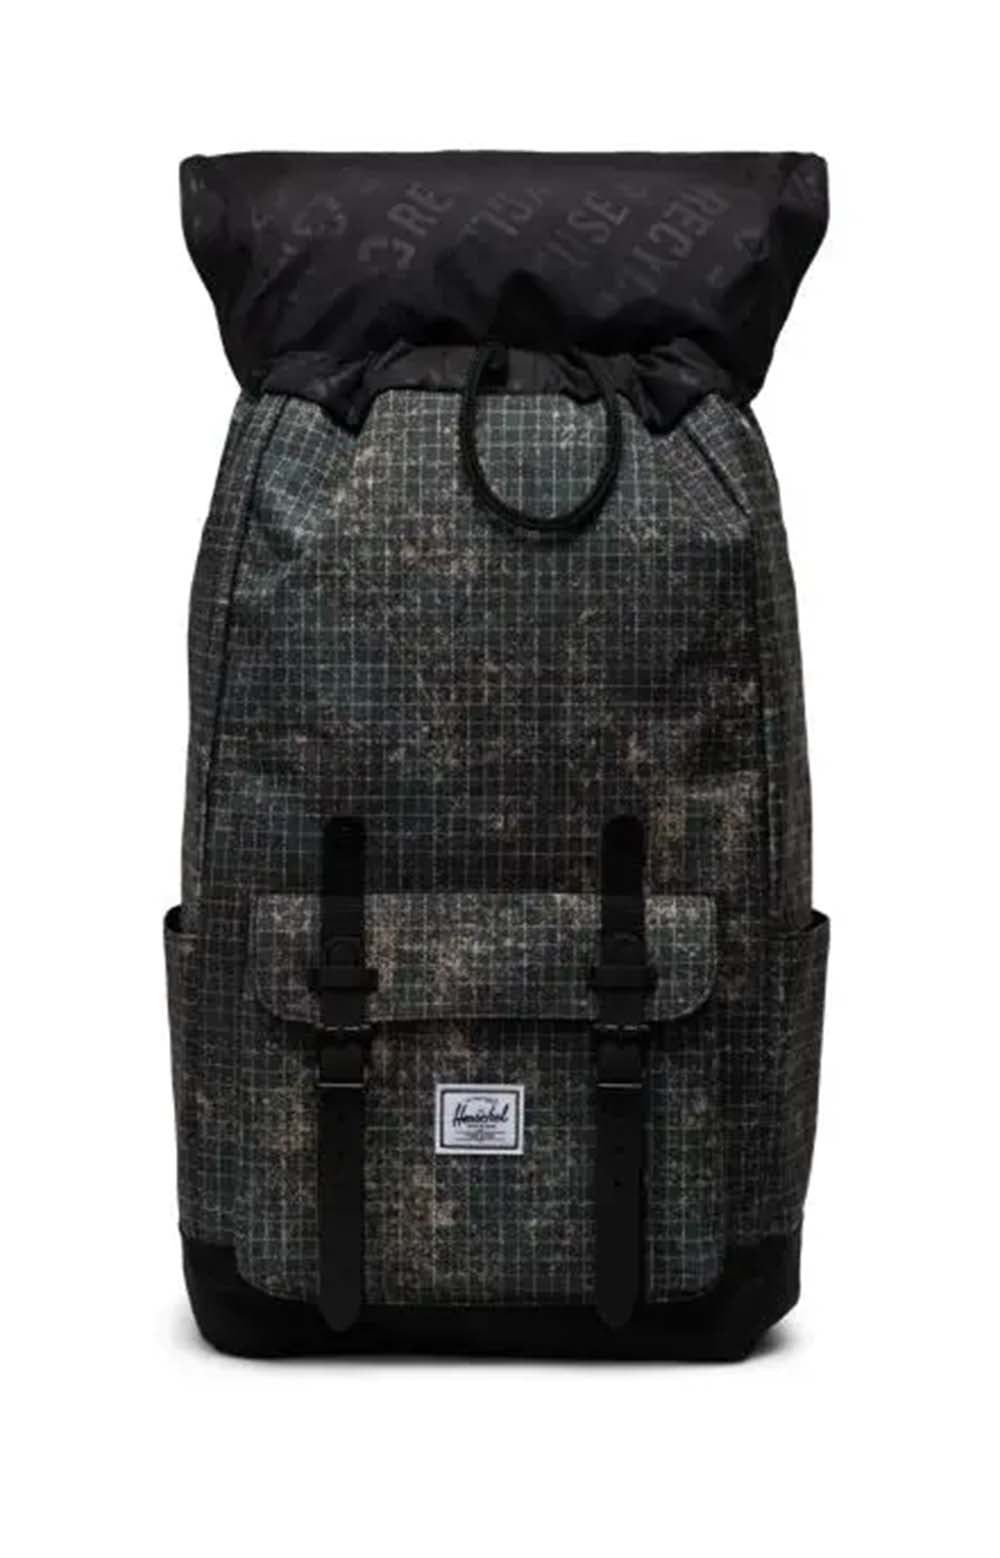 Eco Little America Backpack - Forest Grid